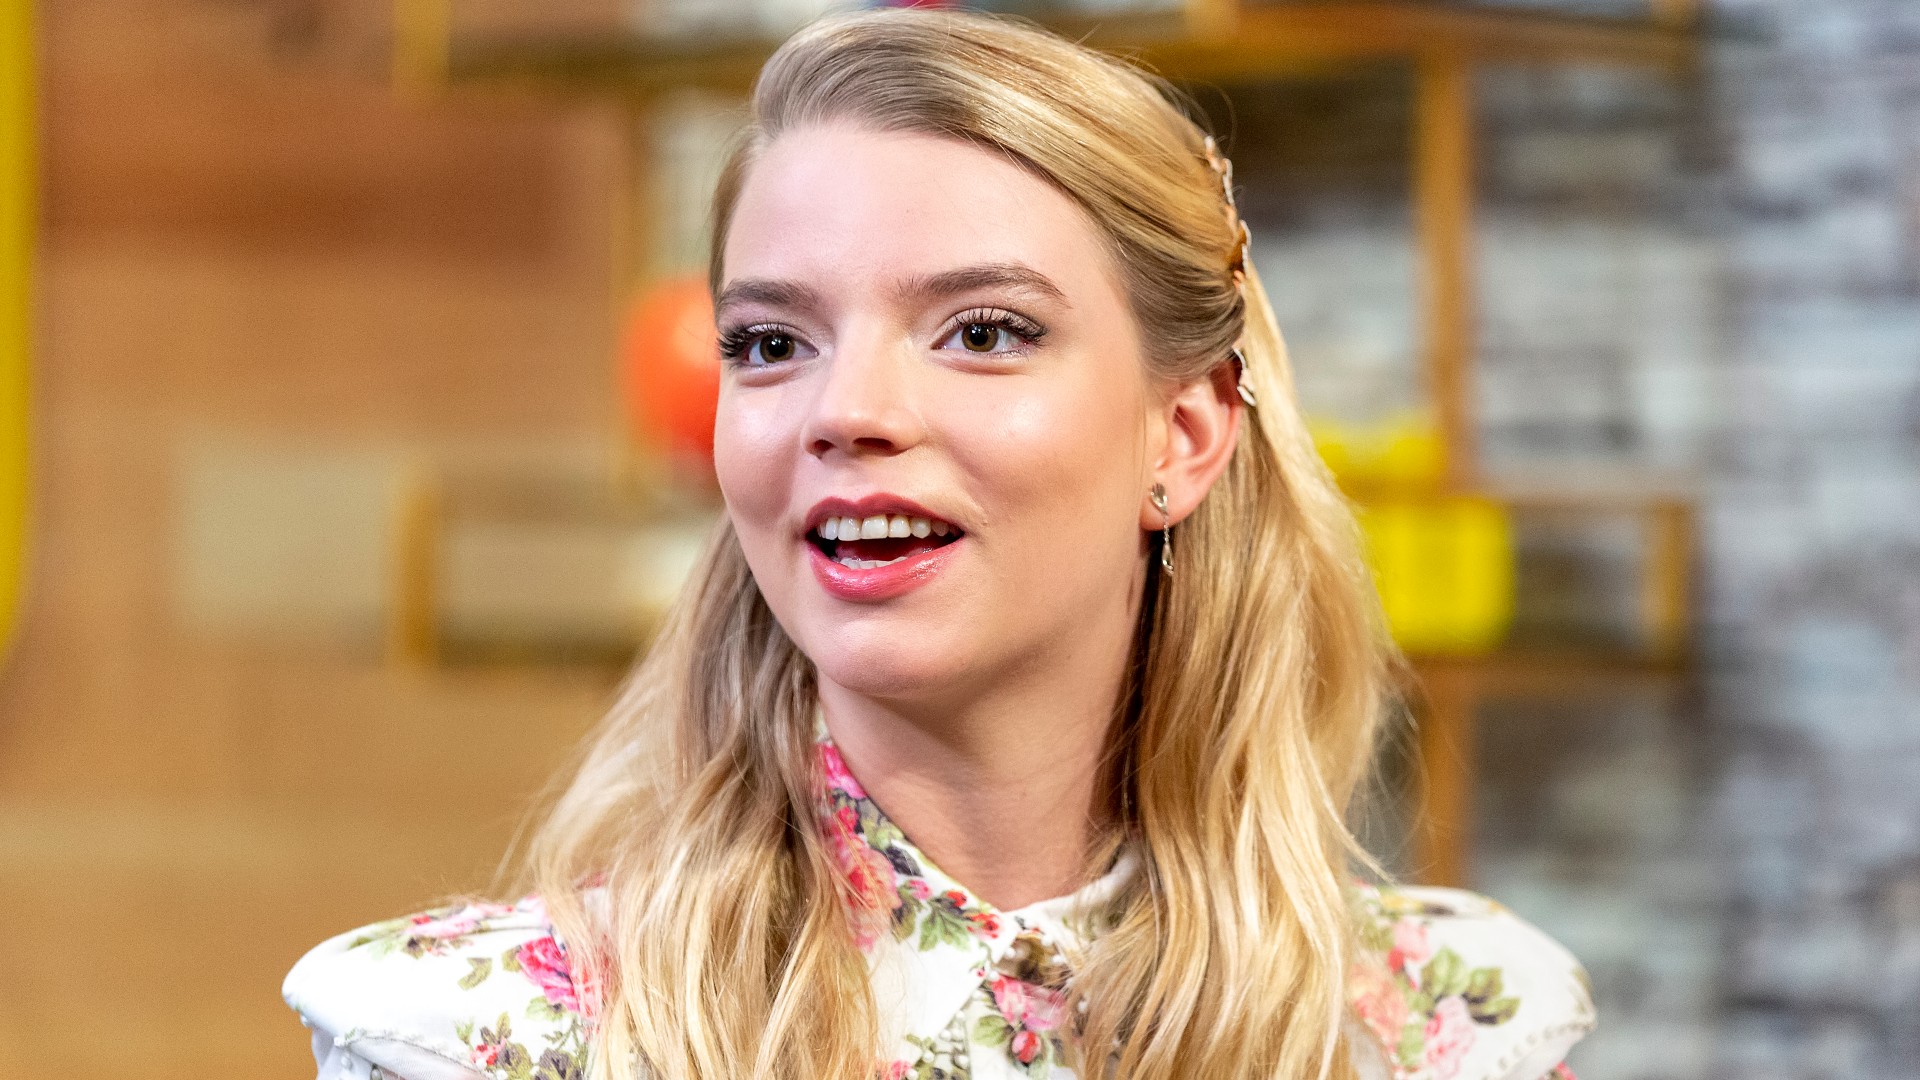 10 Things You Never Knew About 'The Queen's Gambit' Star Anya Taylor-Joy